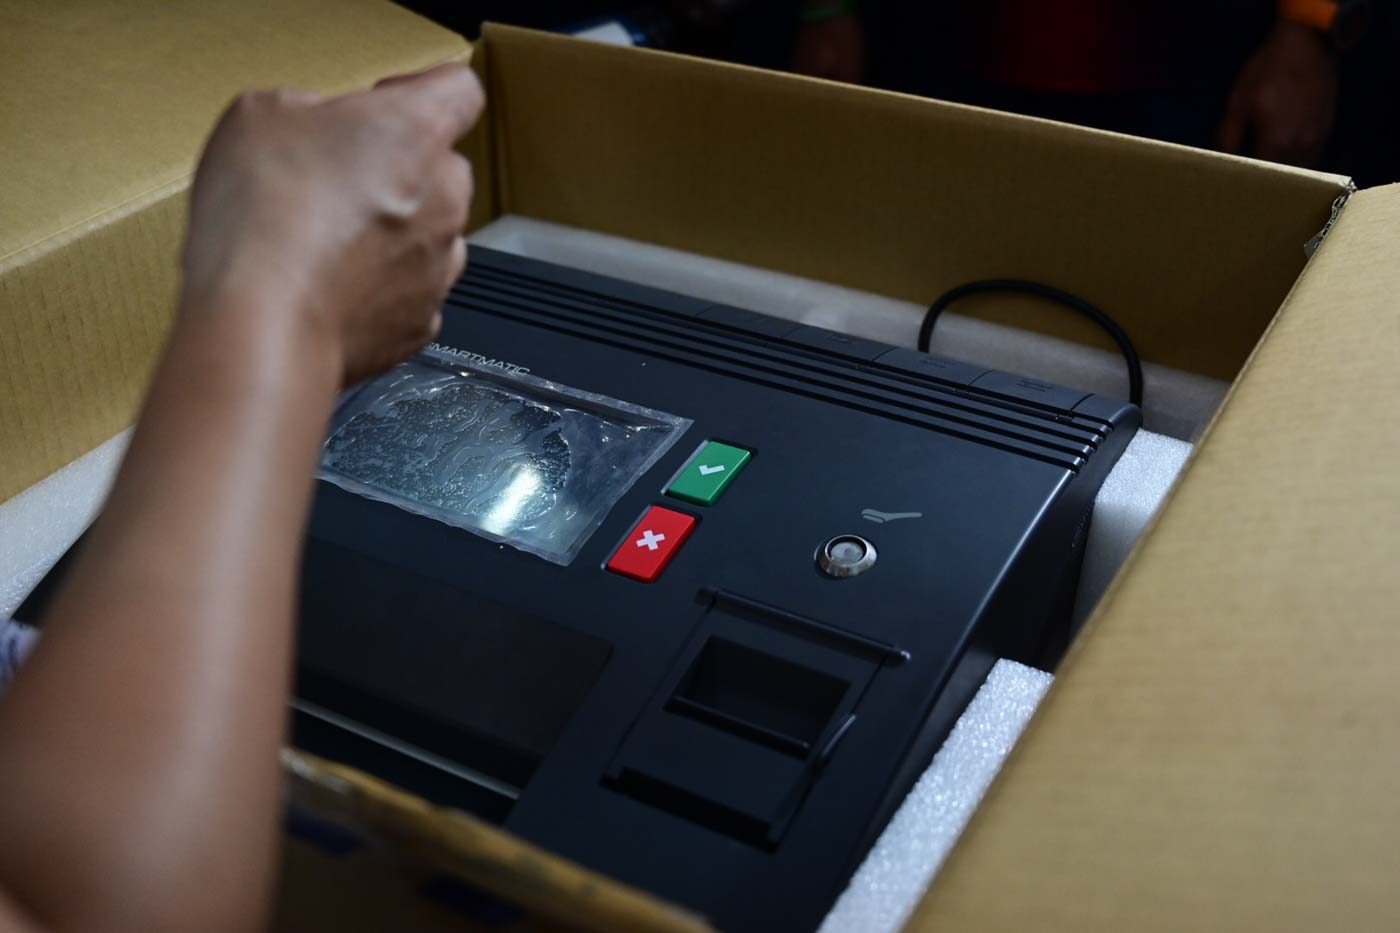 Comelec suspects 'wear and tear' in defective voting machines